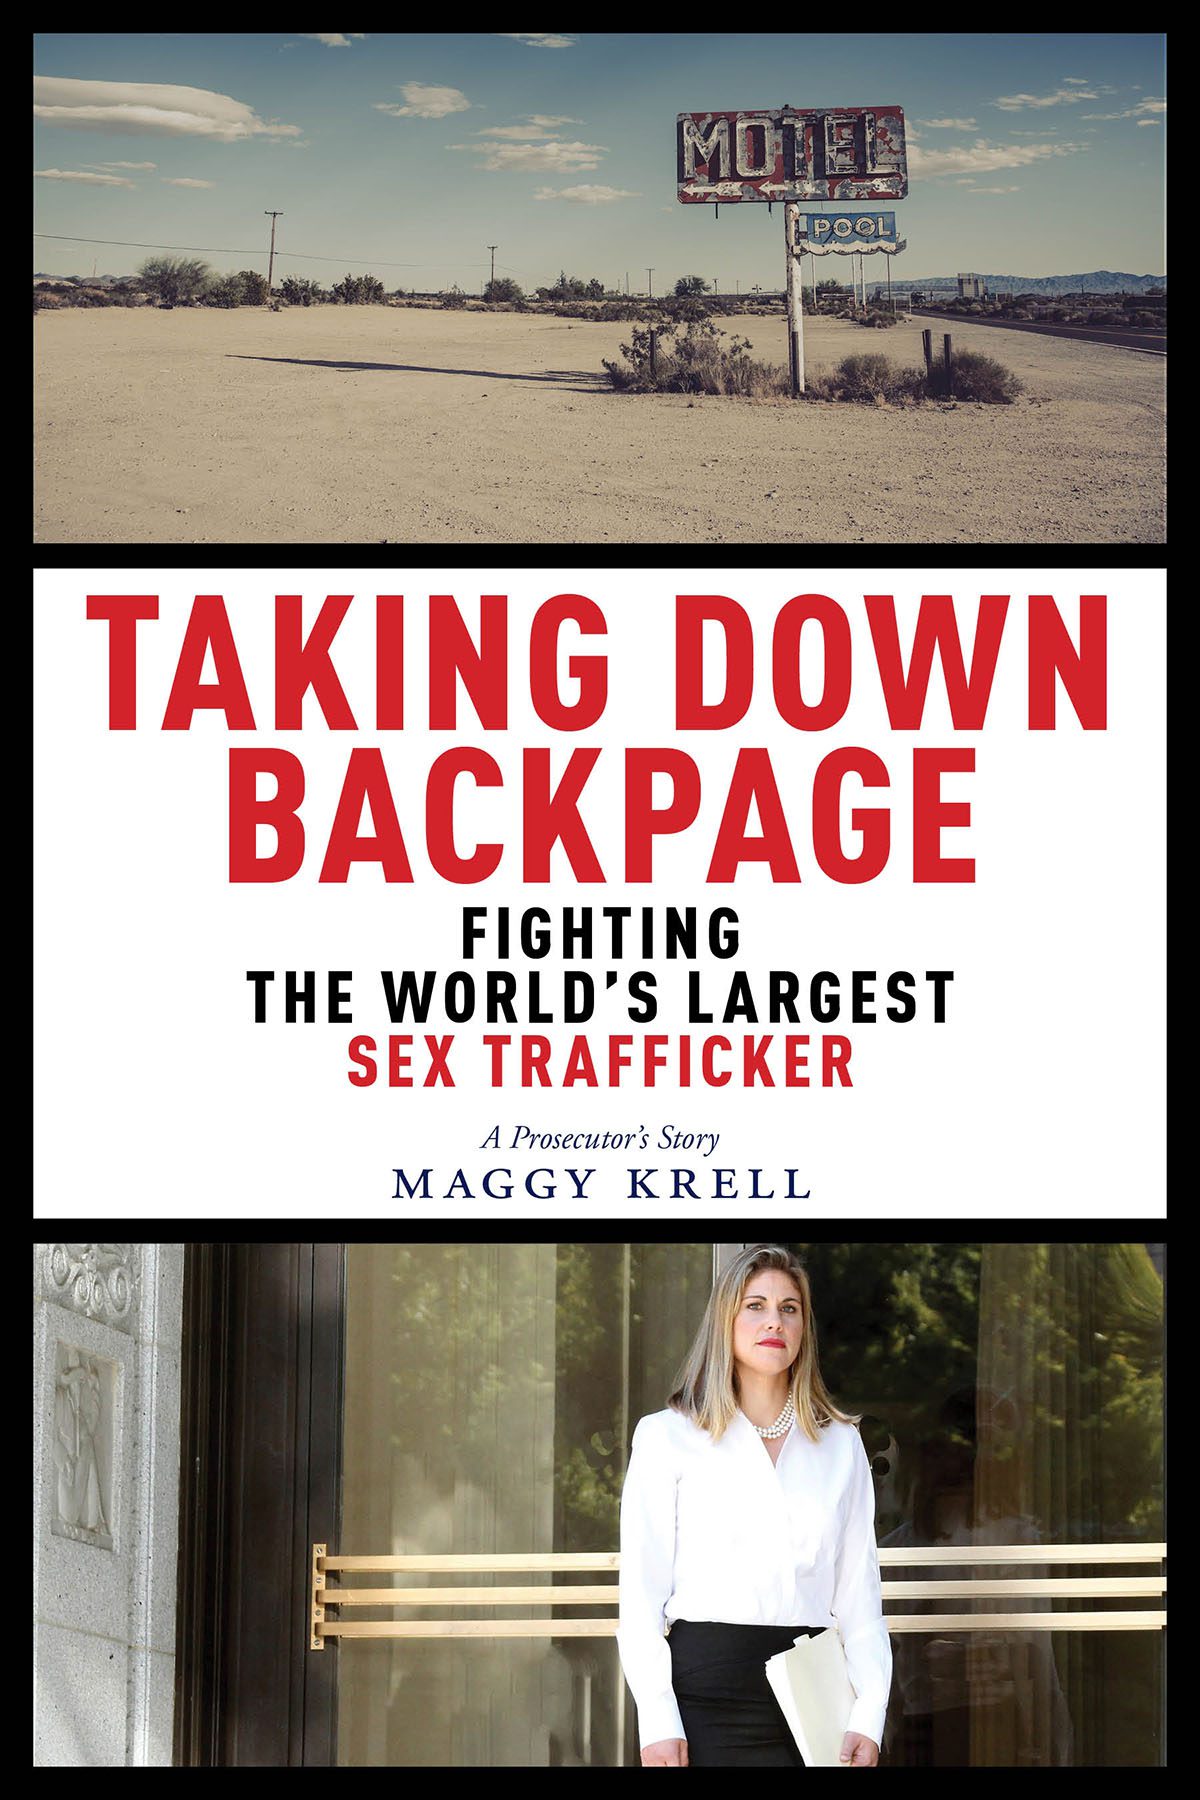 Maggy Krell's book, "Tracking Down Backpage: Fighting The World's Largest Sex Trafficker"